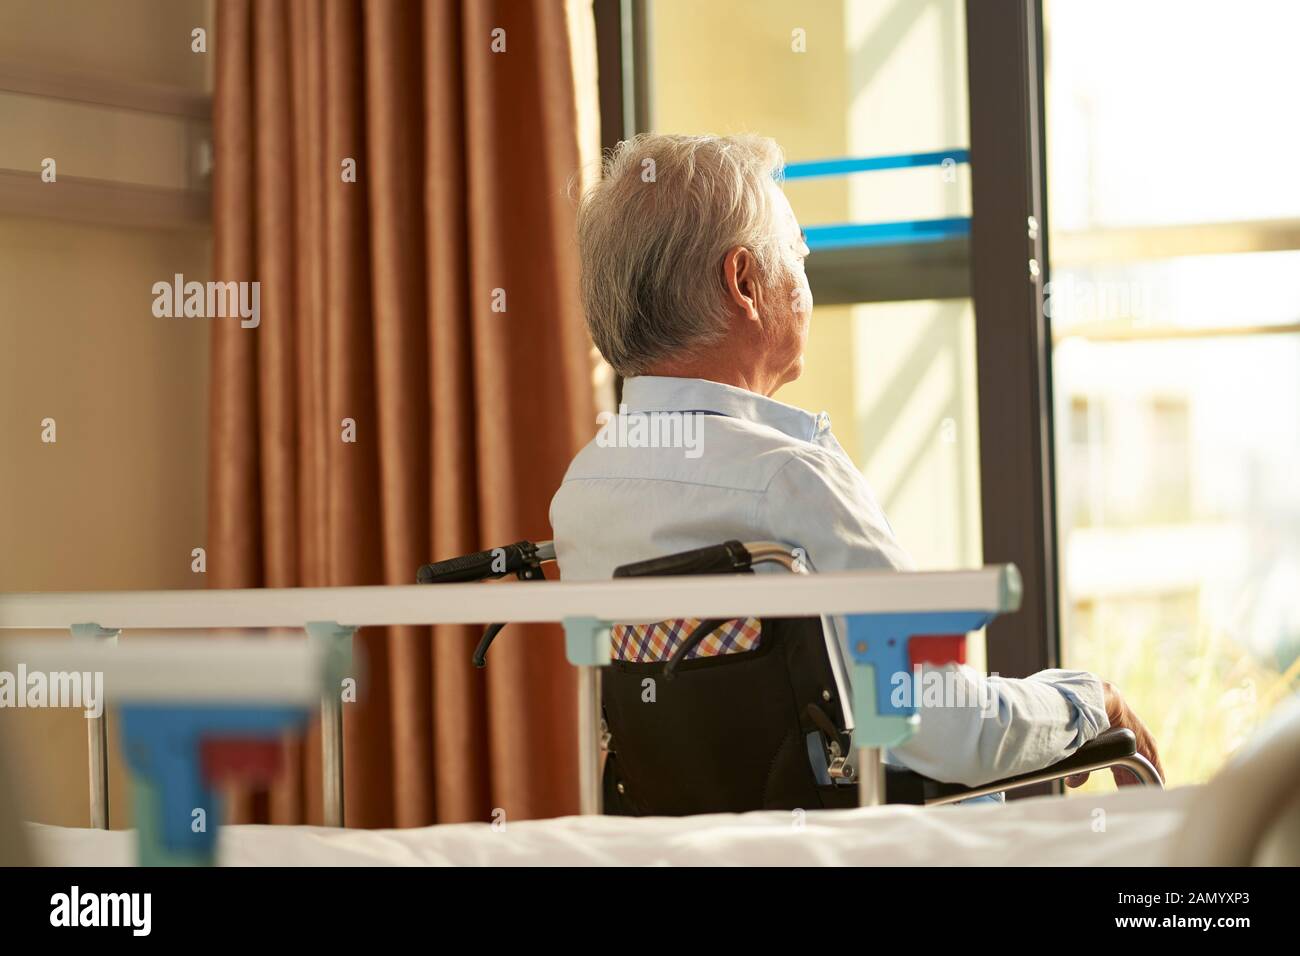 rear view of senior asian man sitting in wheel chair in nusing home or hospital ward looking out of window Stock Photo